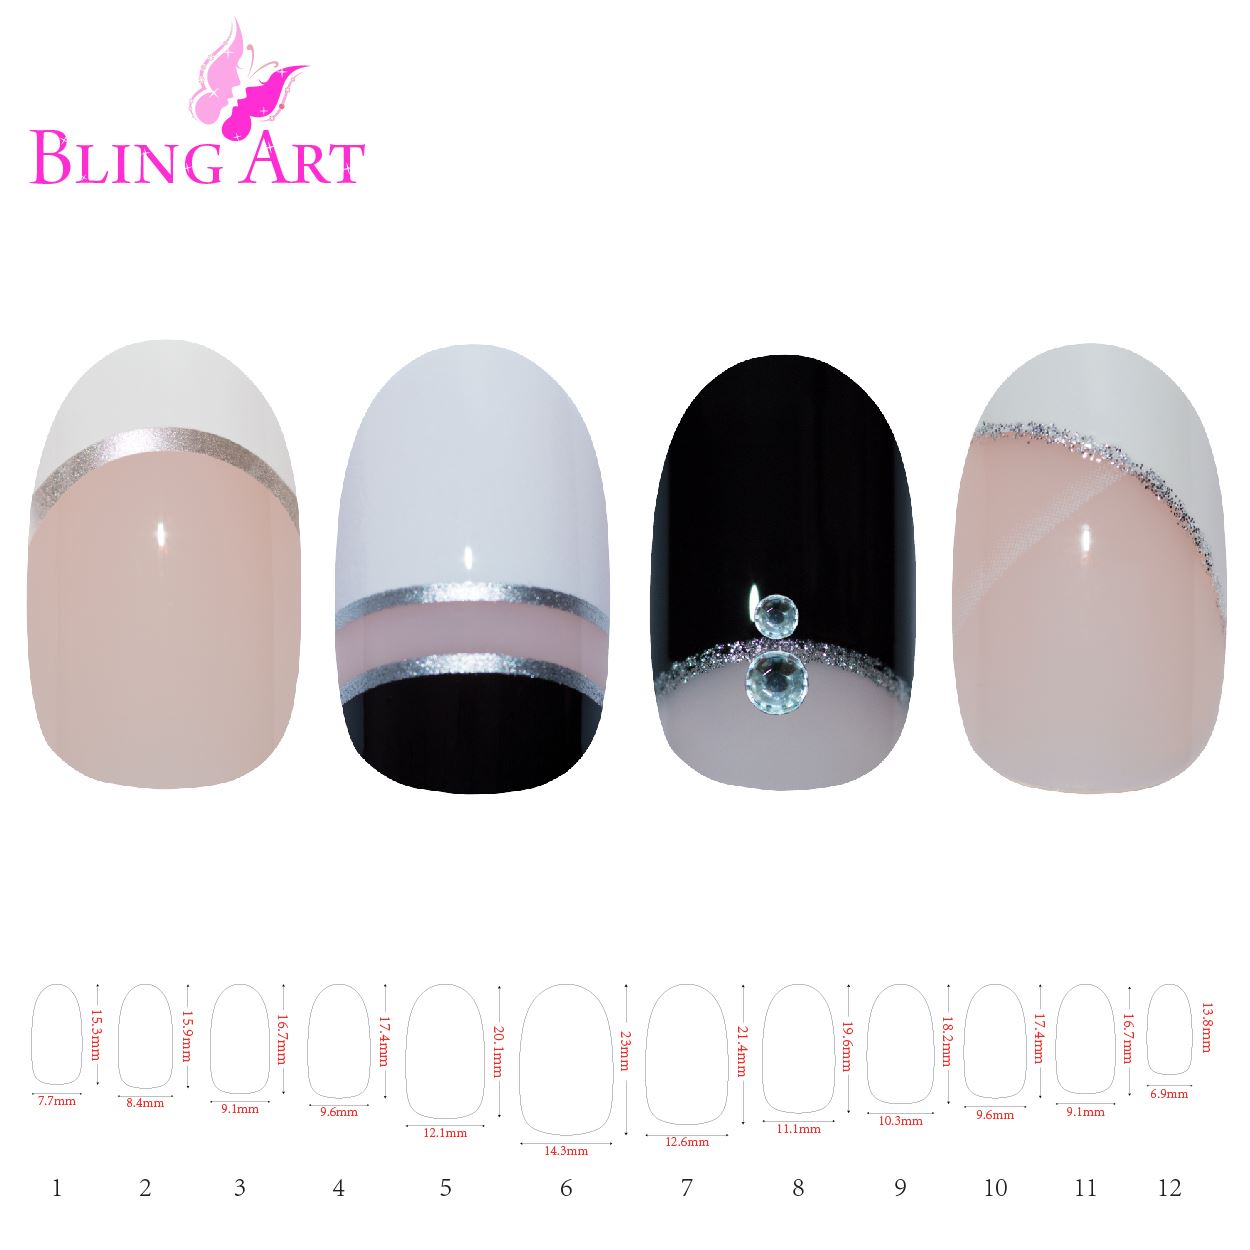 False Nails by Bling Art 360 Oval Medium Transparent Acrylic Fake Nail Tips without glue